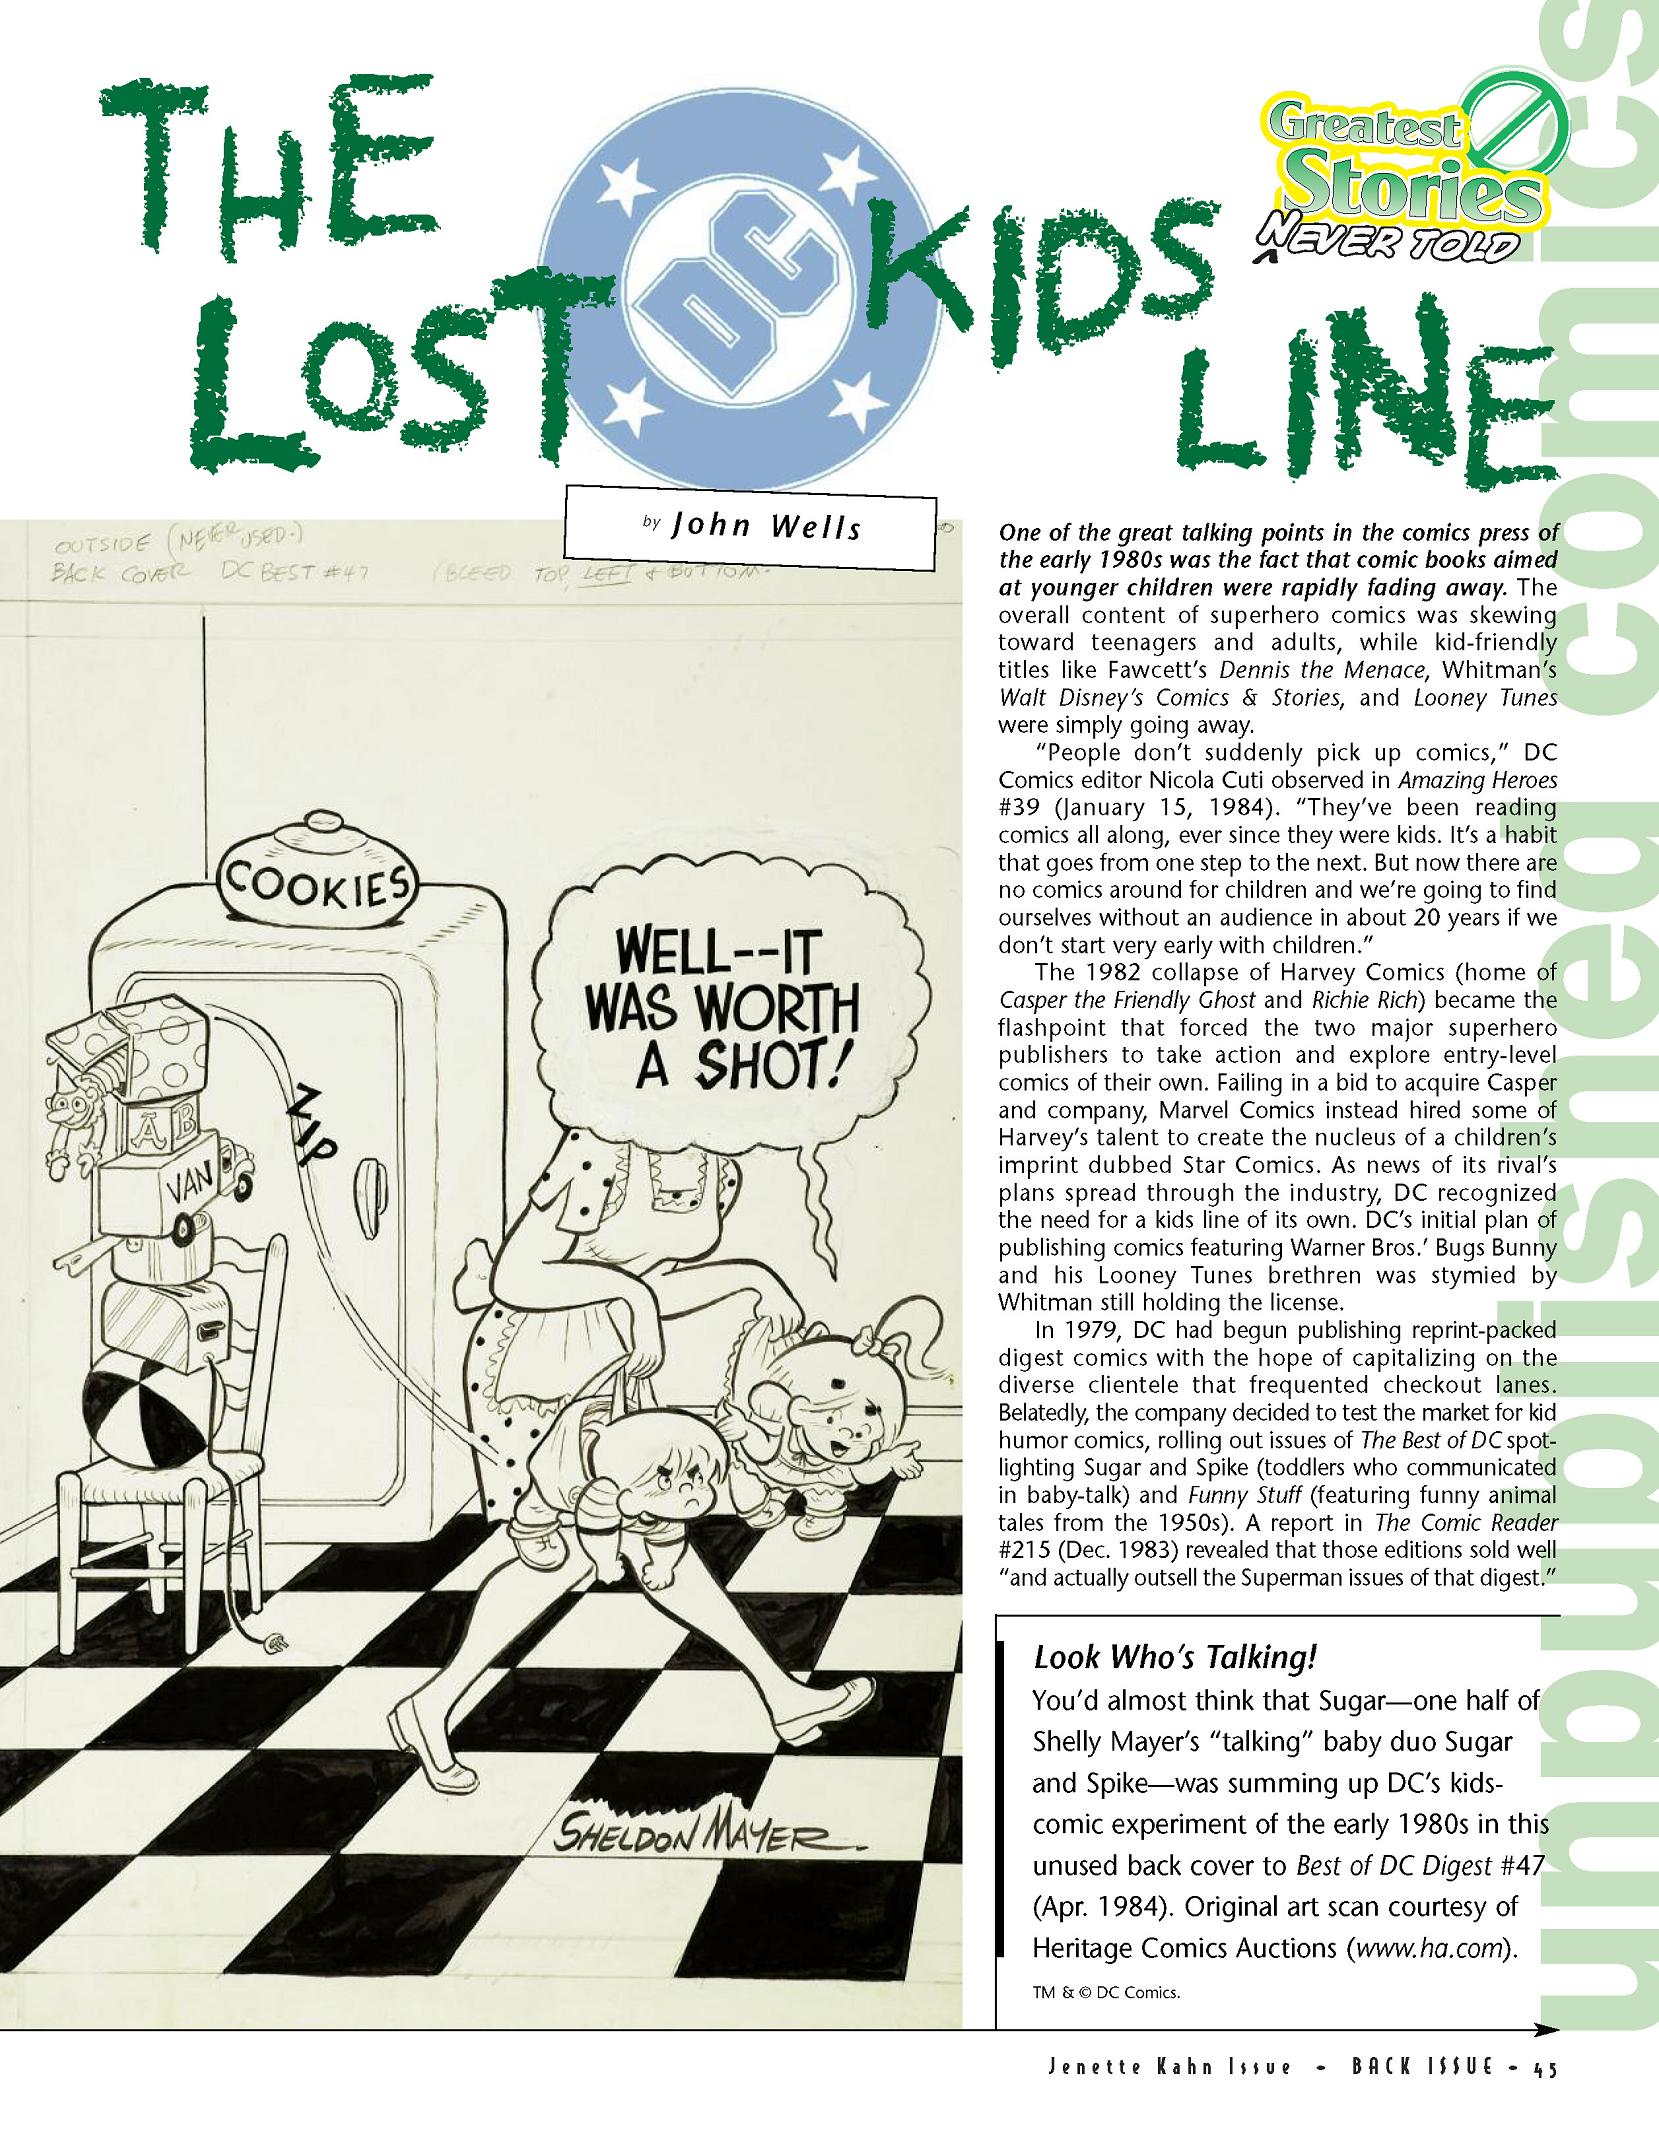 Read online Back Issue comic -  Issue #57 - 44